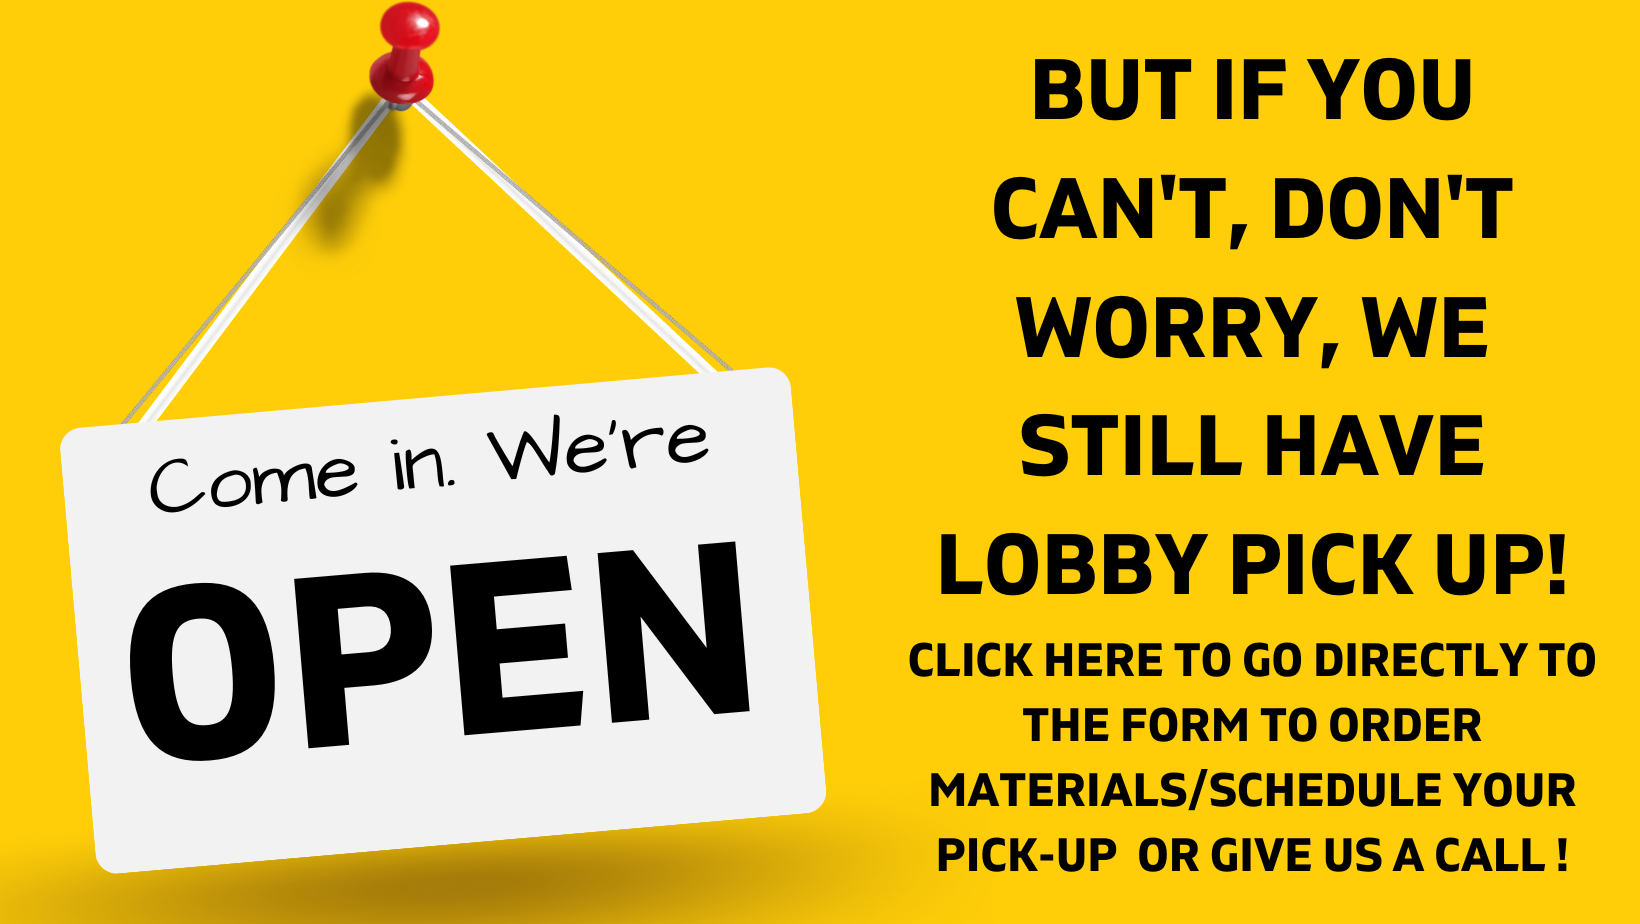 We are open, but if you can't come in we still have lobby pick up and delivery. Click here to go directly to the order form or call us at 508-865-8752